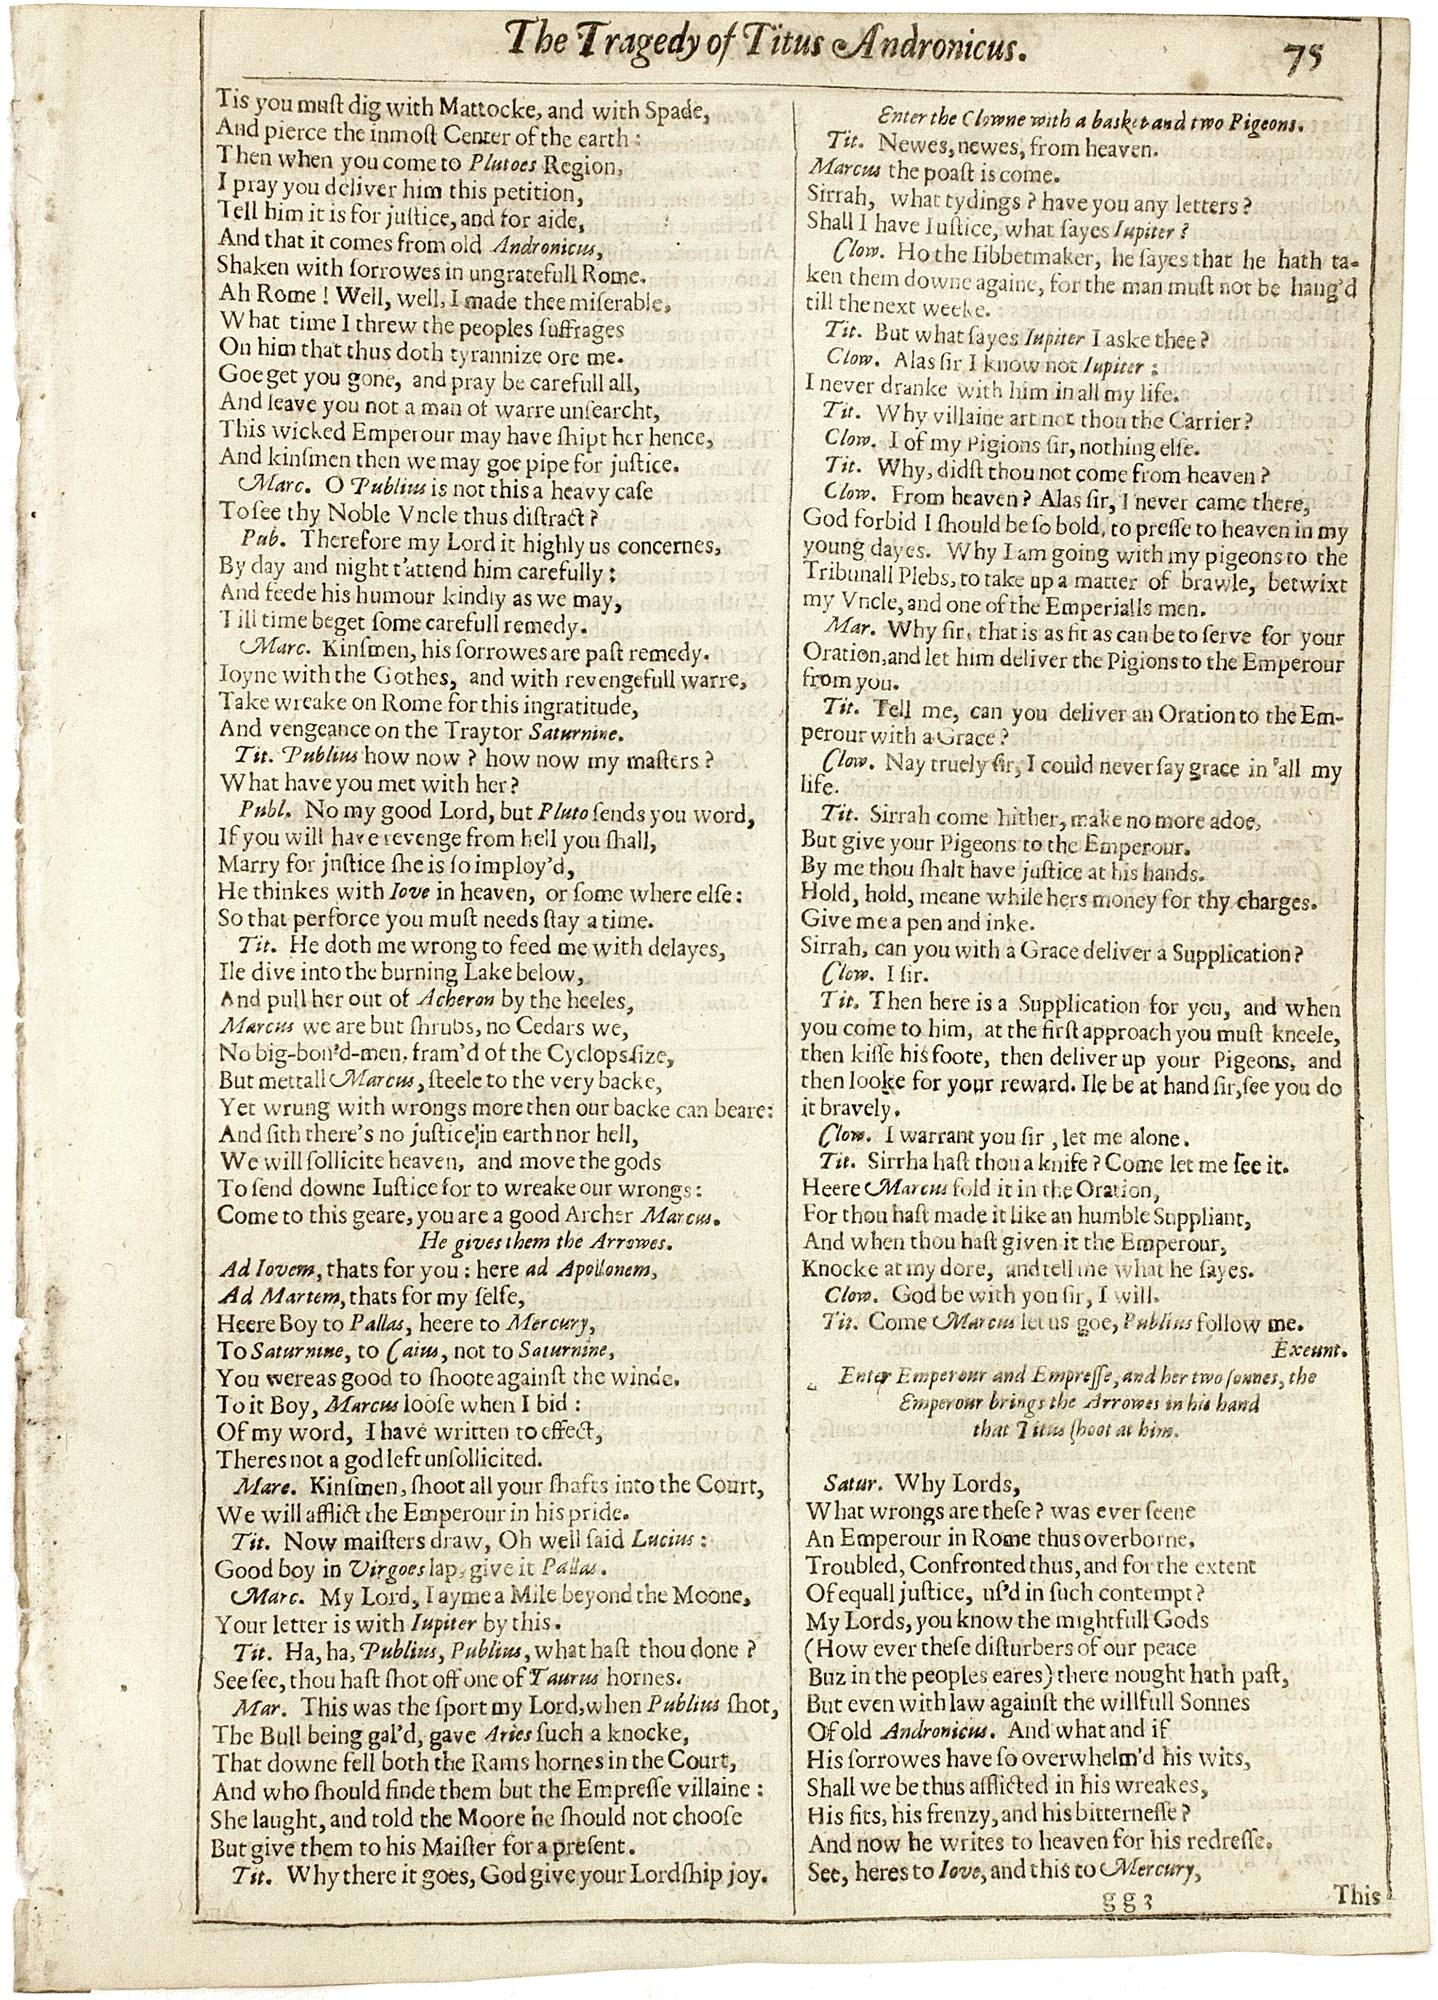 Mid-17th Century Works of William Shakespeare. 1632 - (Tragedy of Titus Andronicus) - page 75-76 For Sale